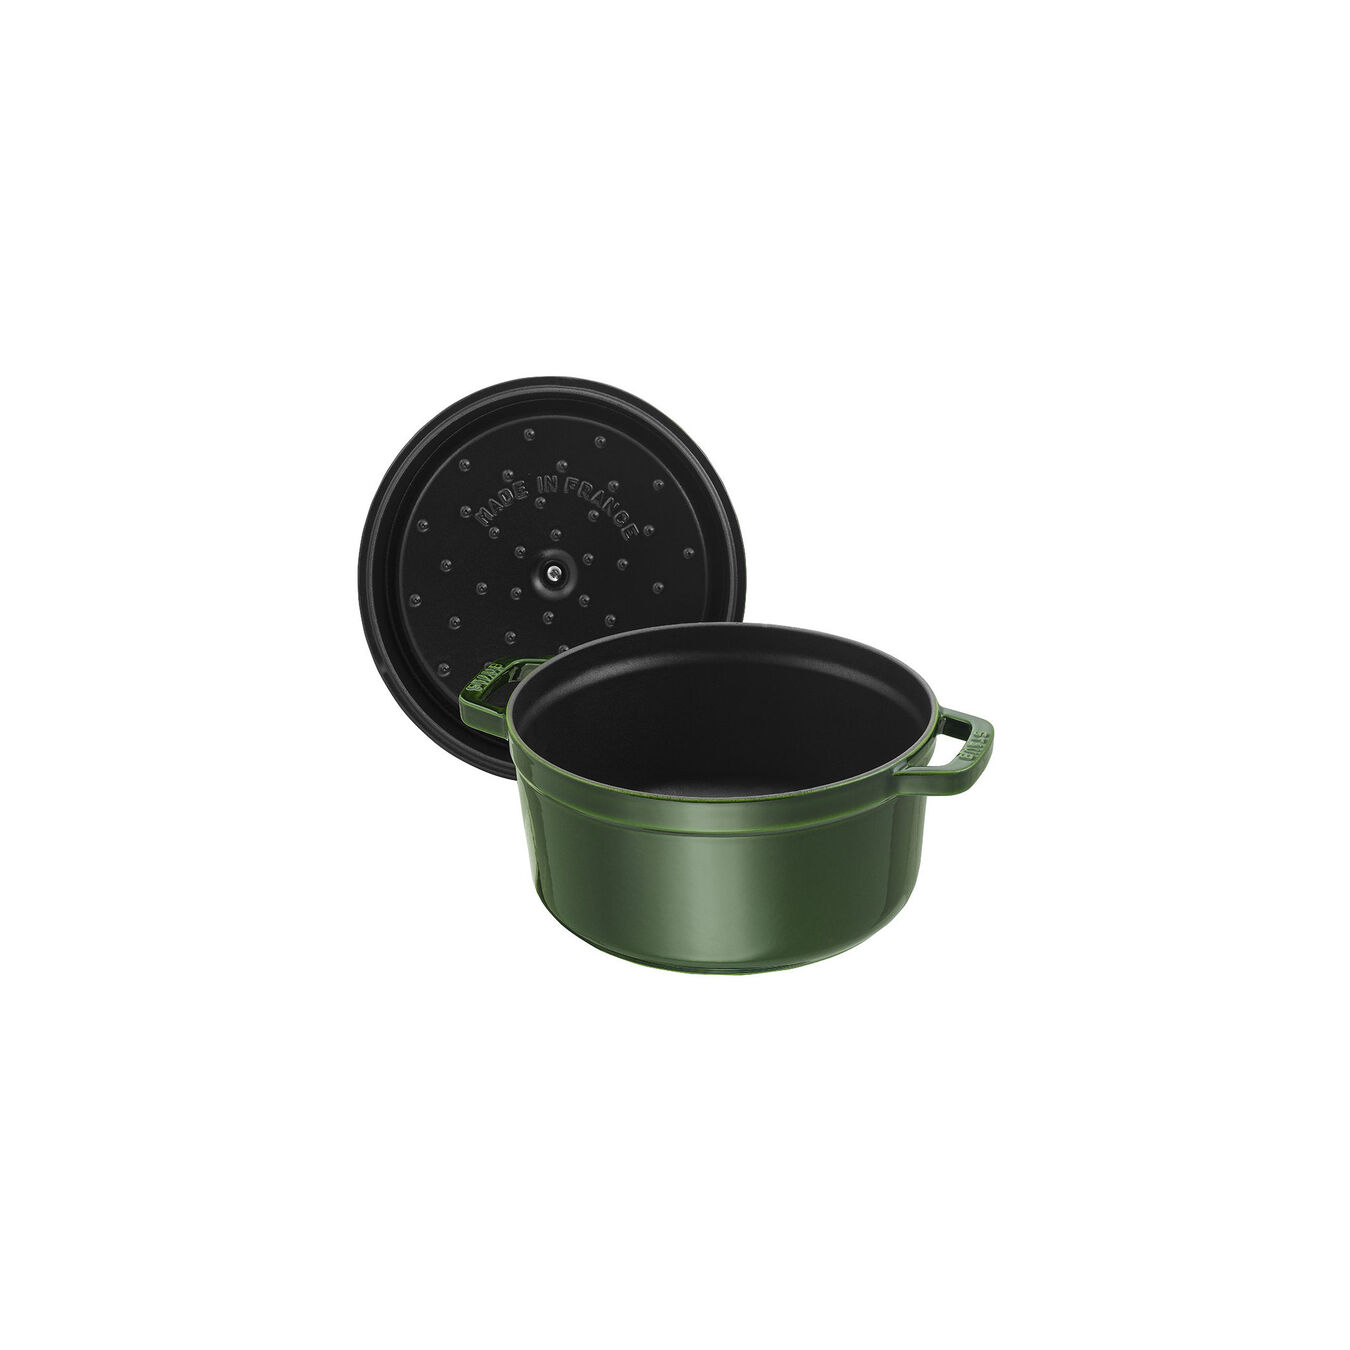 2.5 l cast iron round Cocotte, basil-green - Visual Imperfections,,large 4